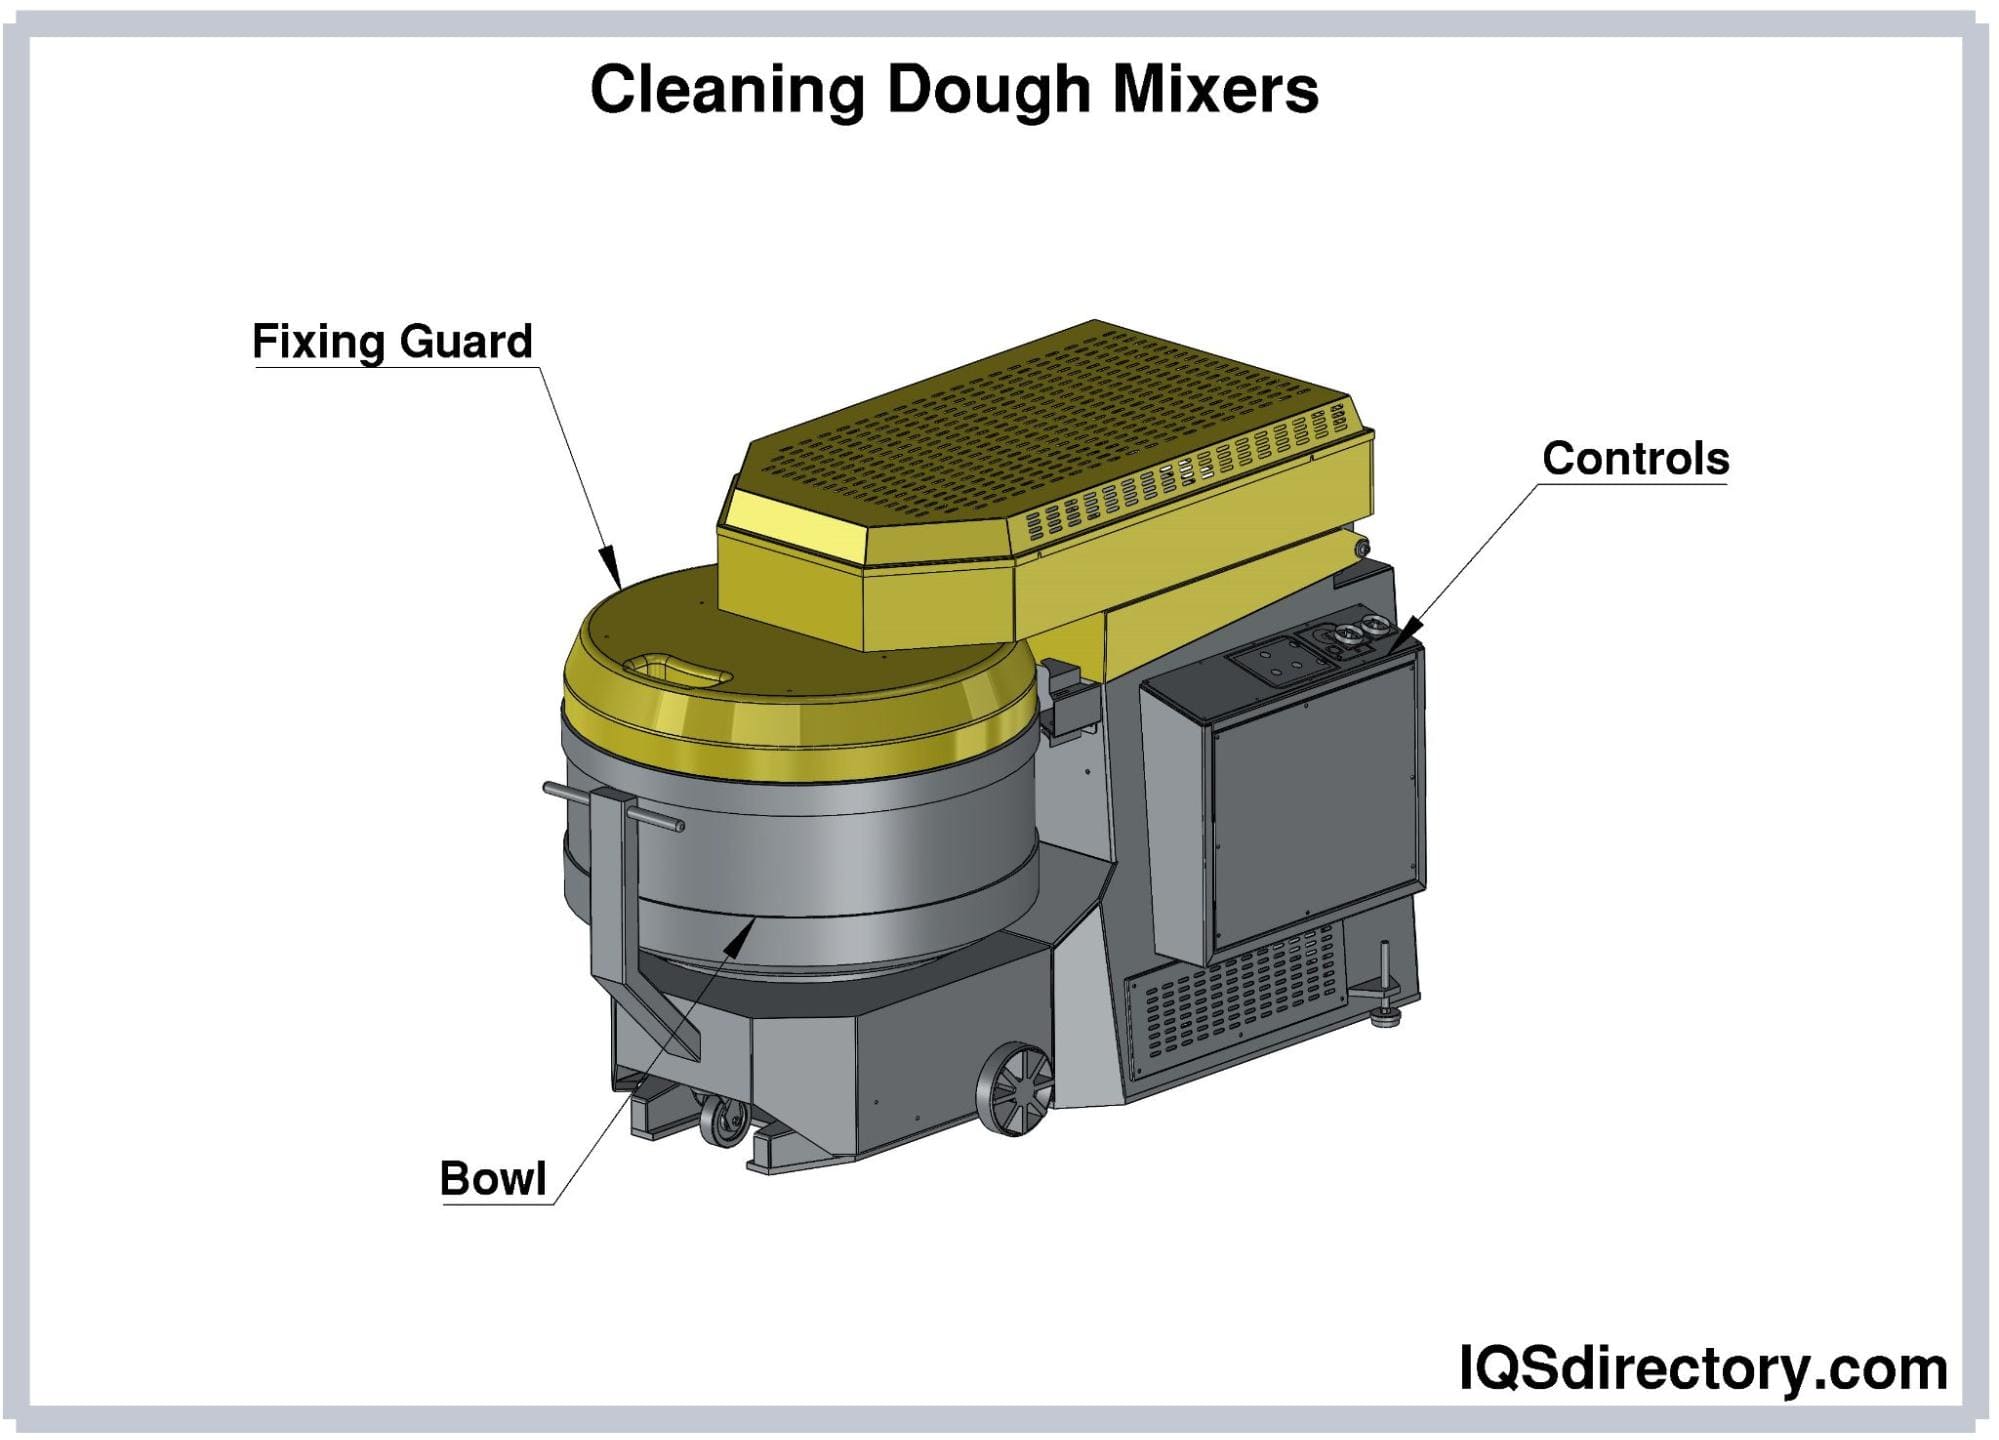 Cleaning Dough Mixers